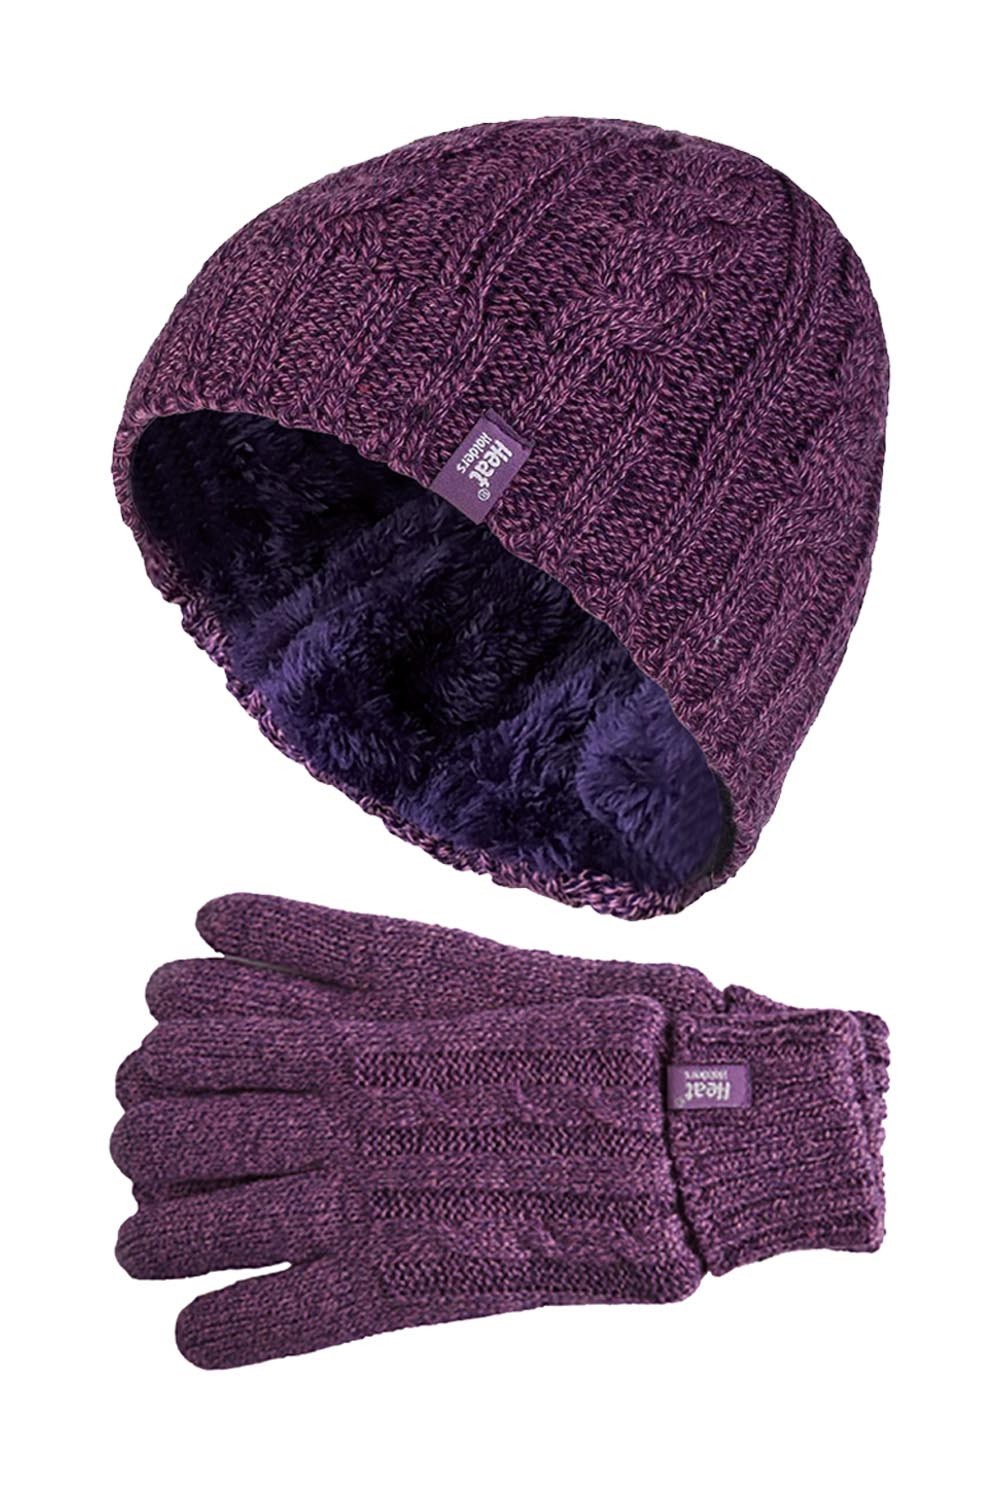 Womens Thermal Winter Hat And Gloves Set -